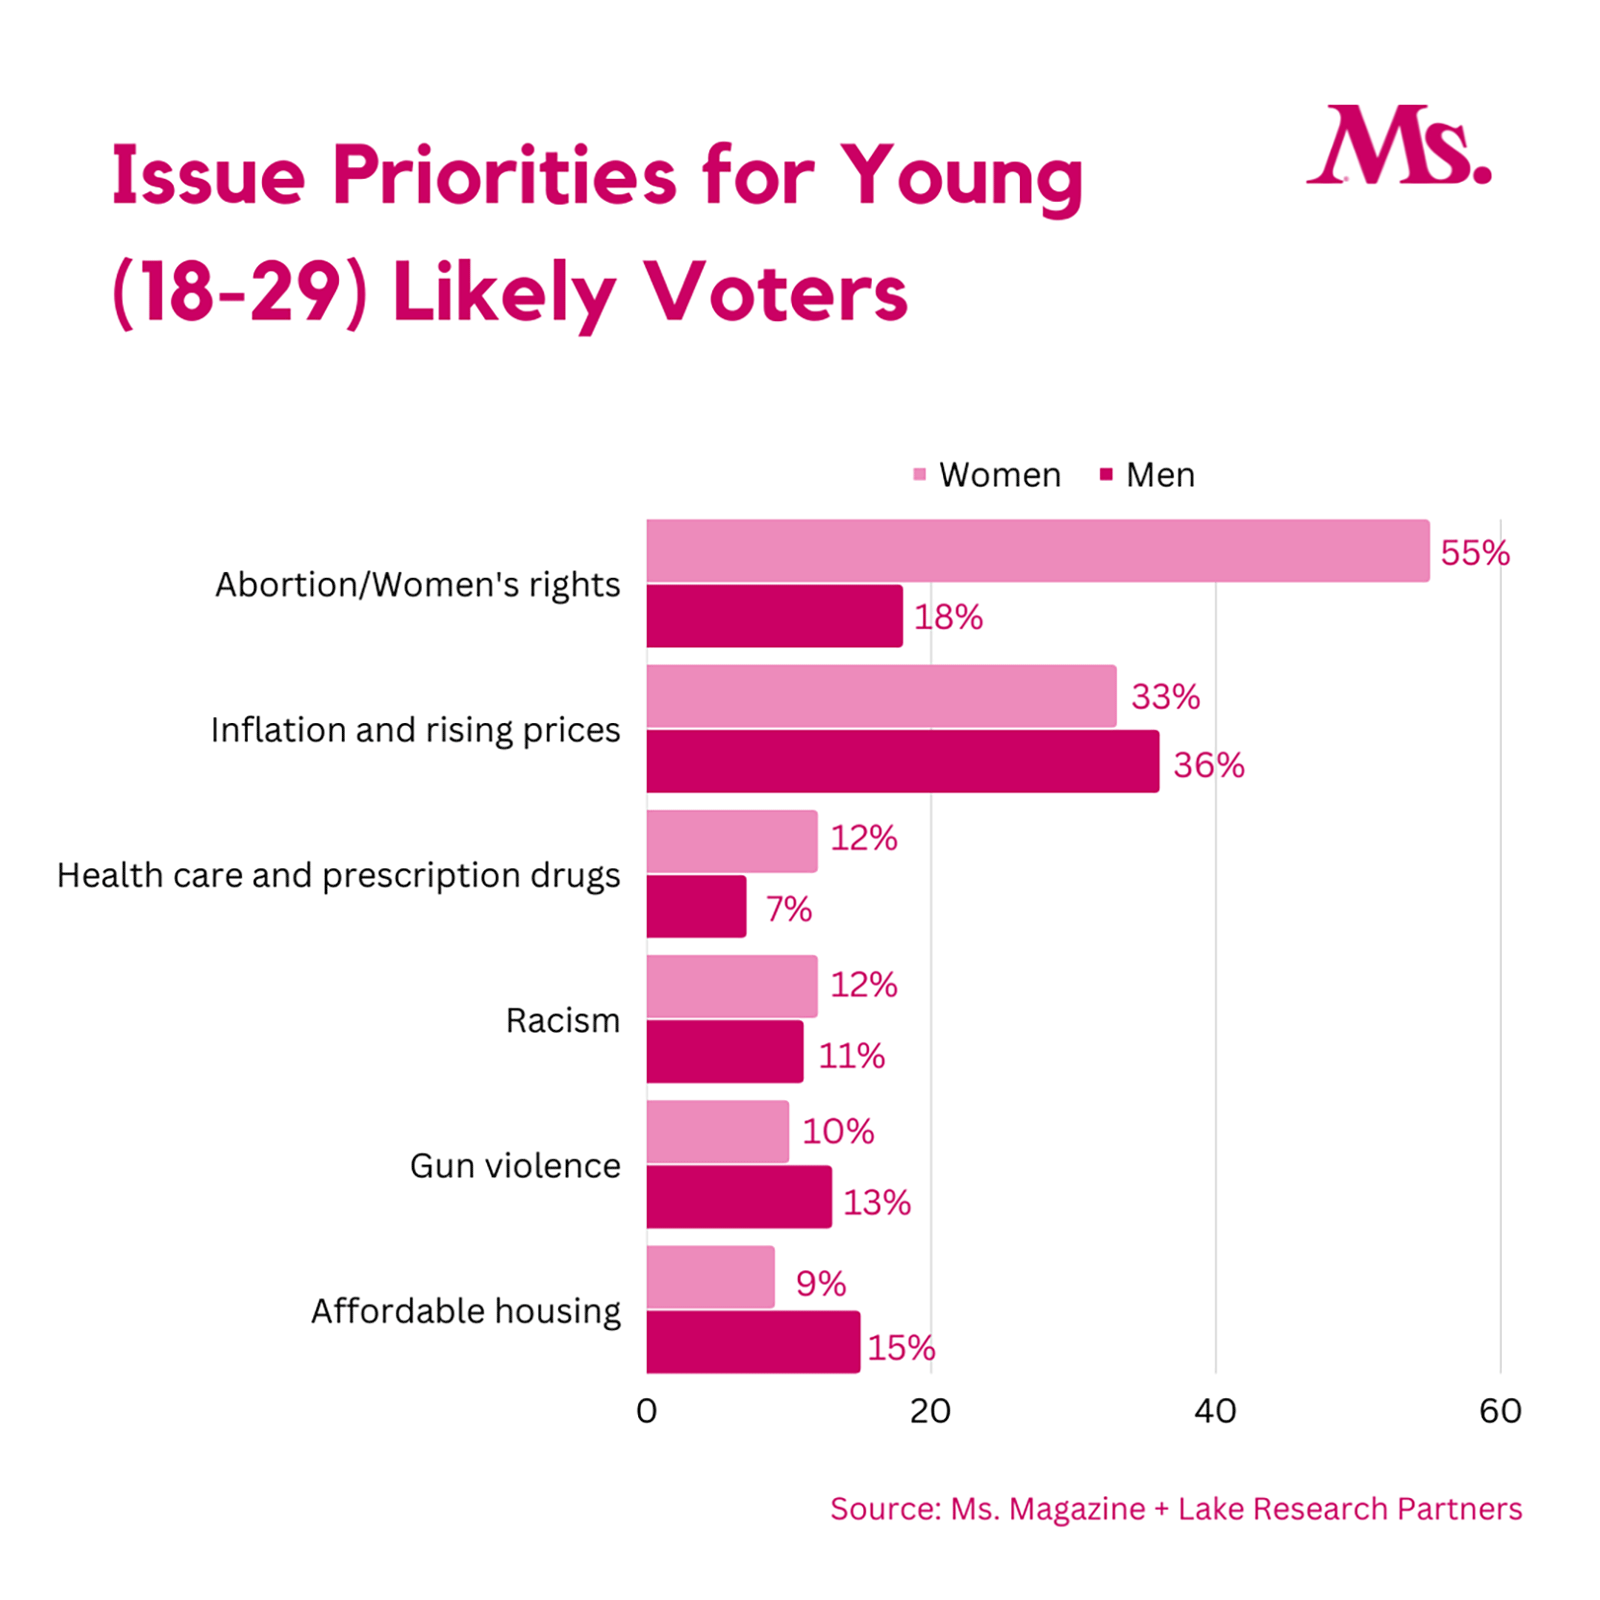 Graph priority issues for young voters ages 18-29